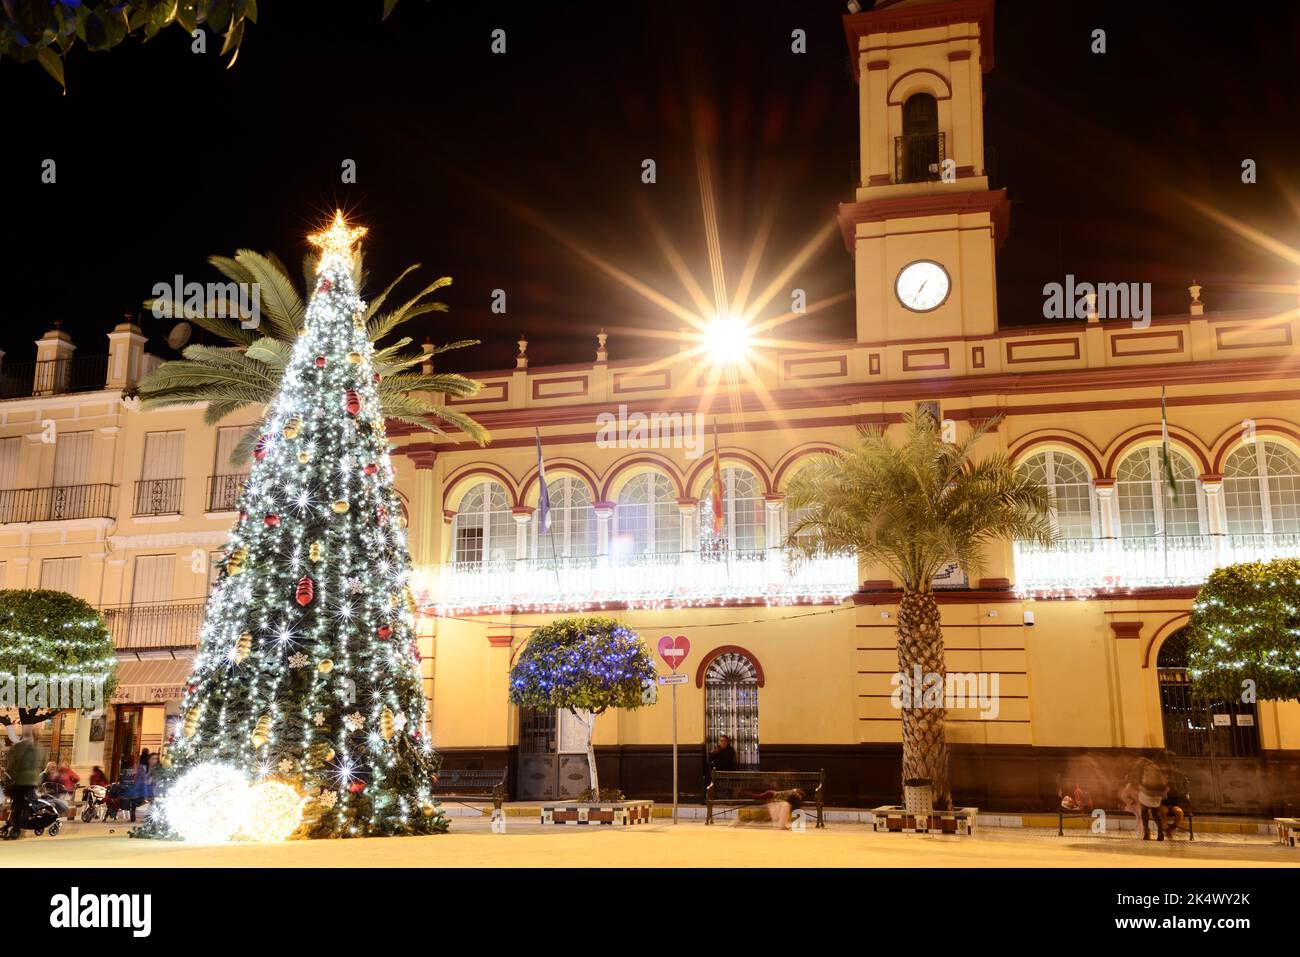 Arahal (Seville). Spain. December 14, 2021. Christmas tree and urban Christmas decorations in a town square. Urban Christmas scene in a village in sou Stock Photo